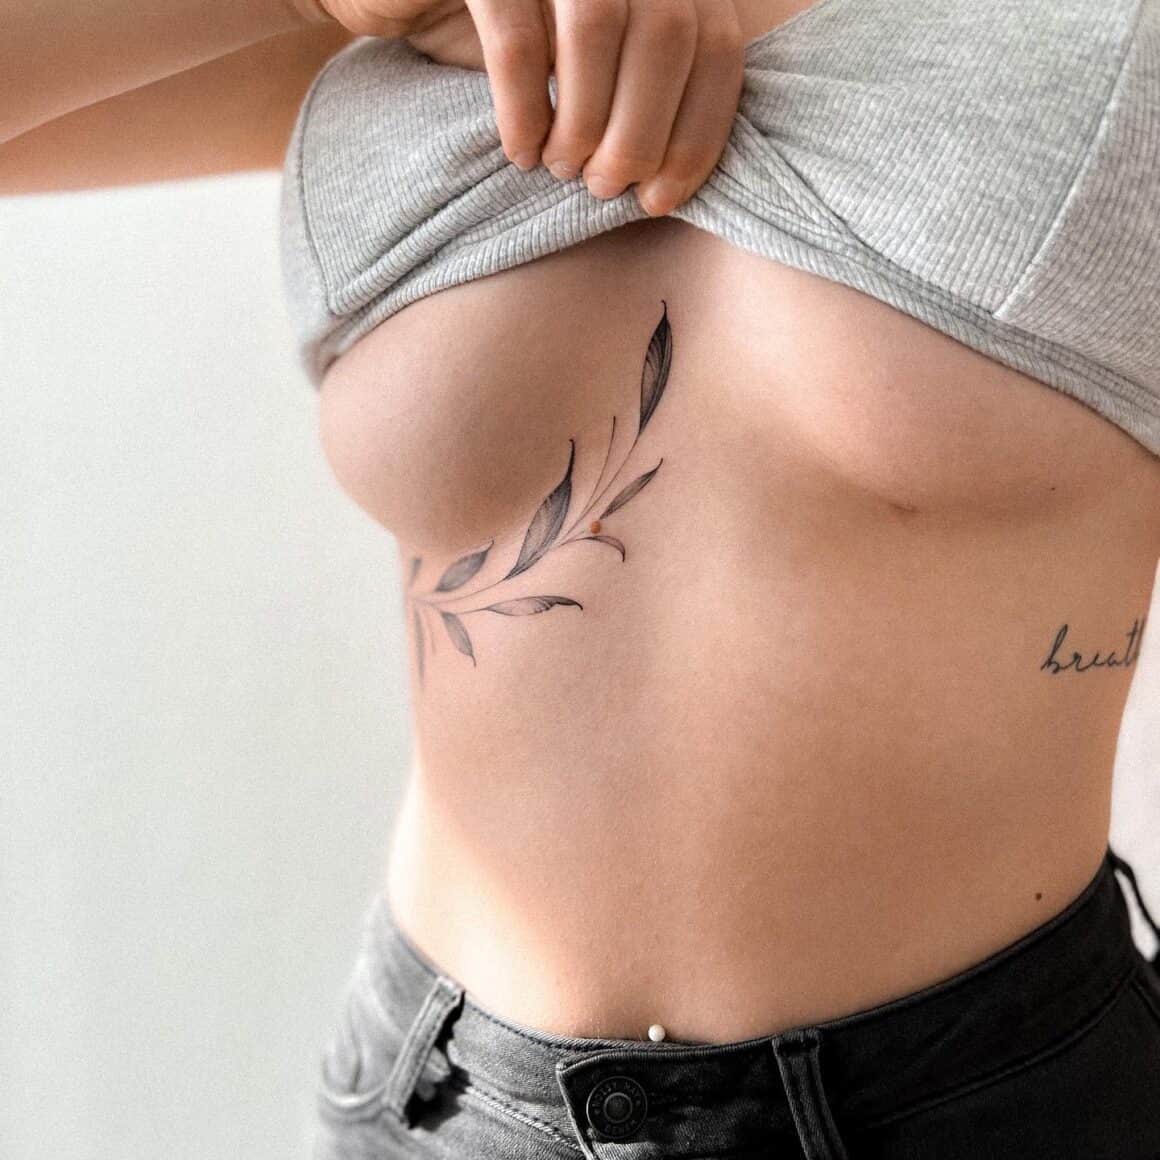 Here's What You Need To Know About Under-Boob Tattoos